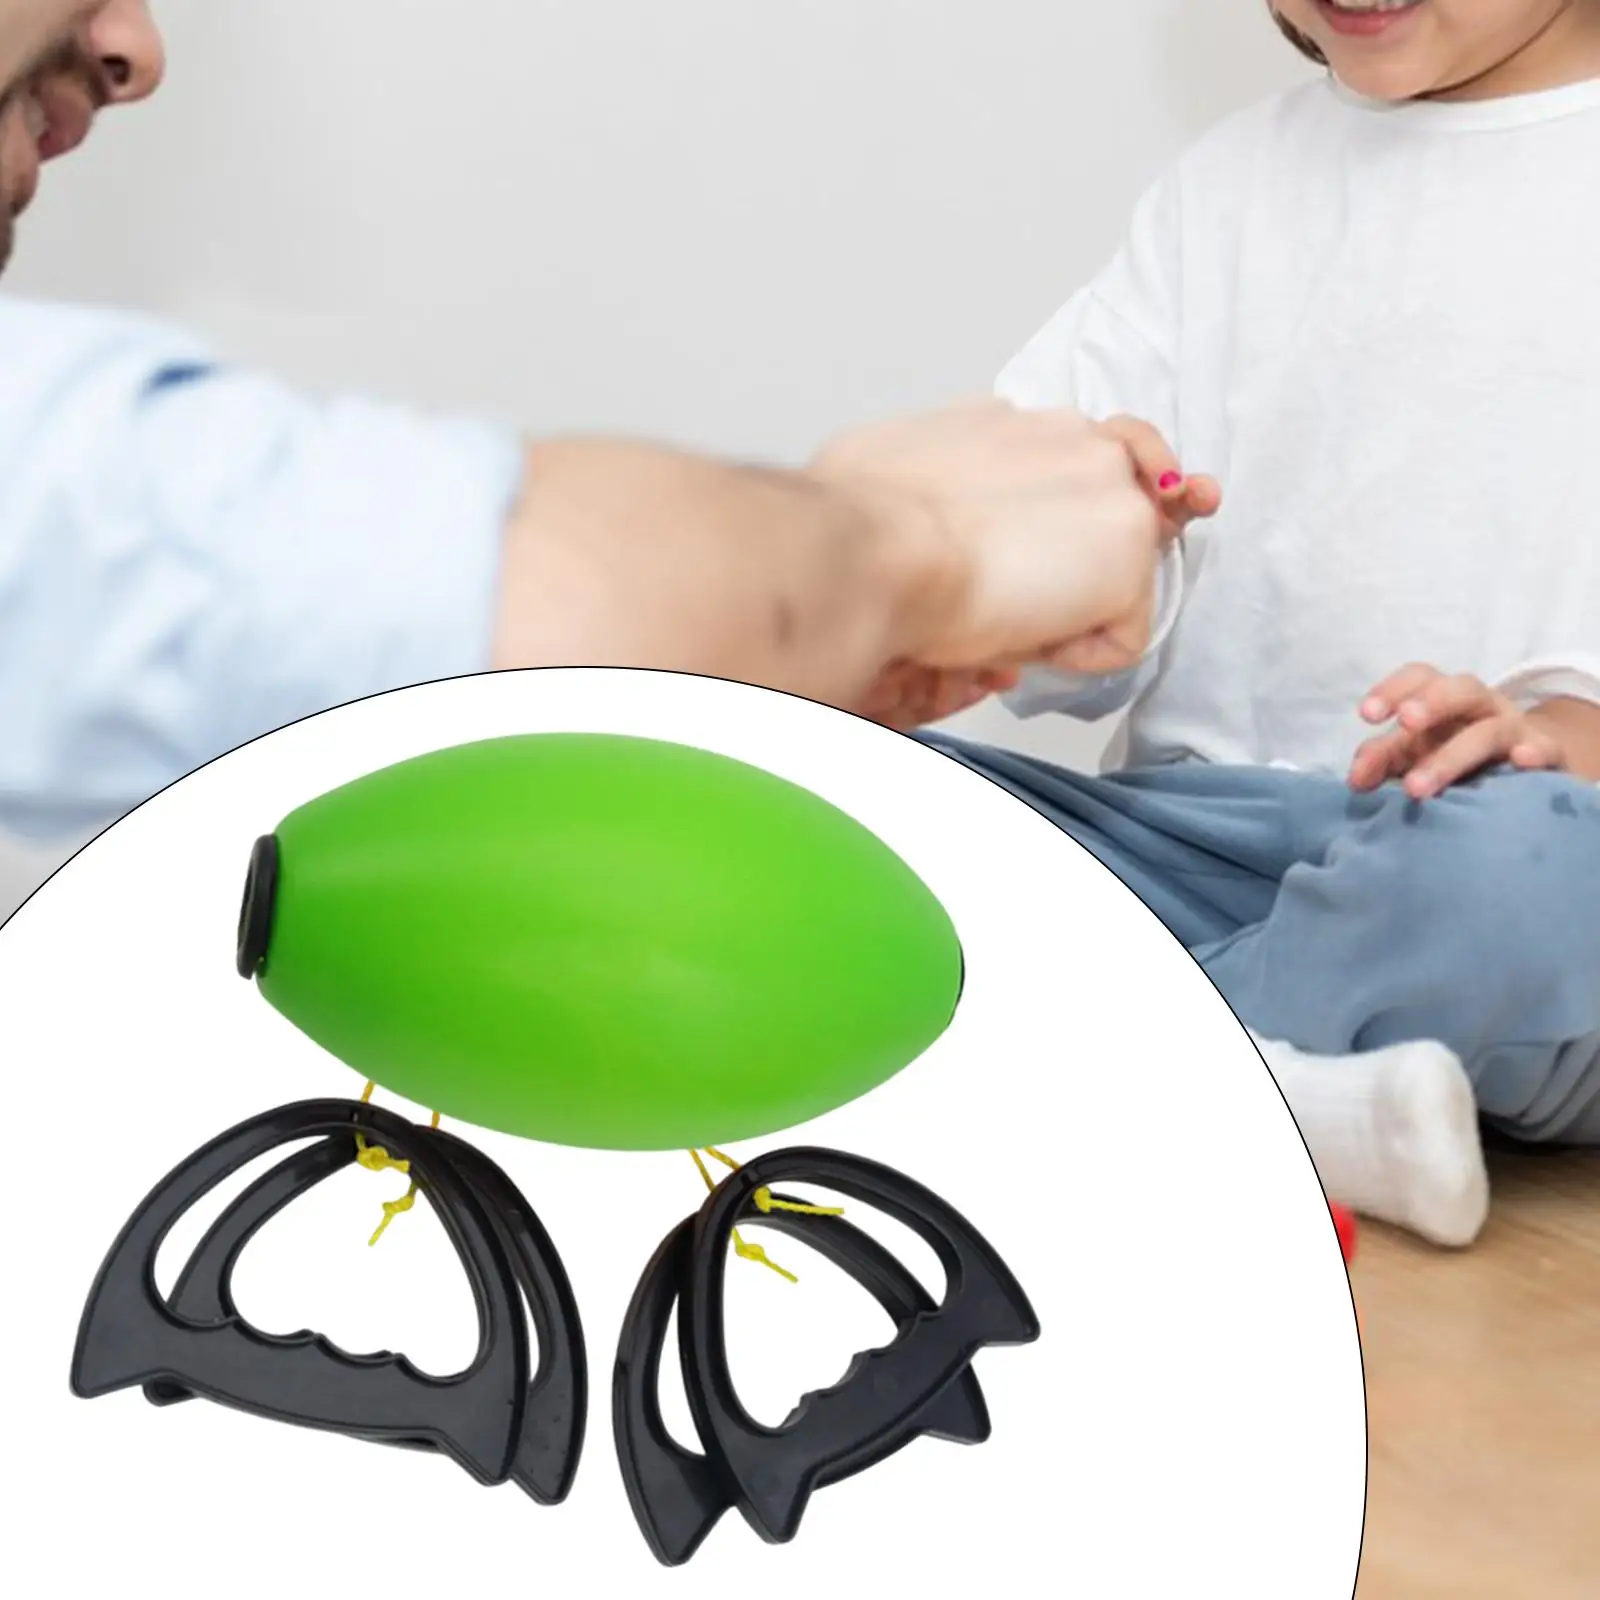 Kids Pull Shuttle Ball Game for Exercising Arm Coordination Fun Parent Child